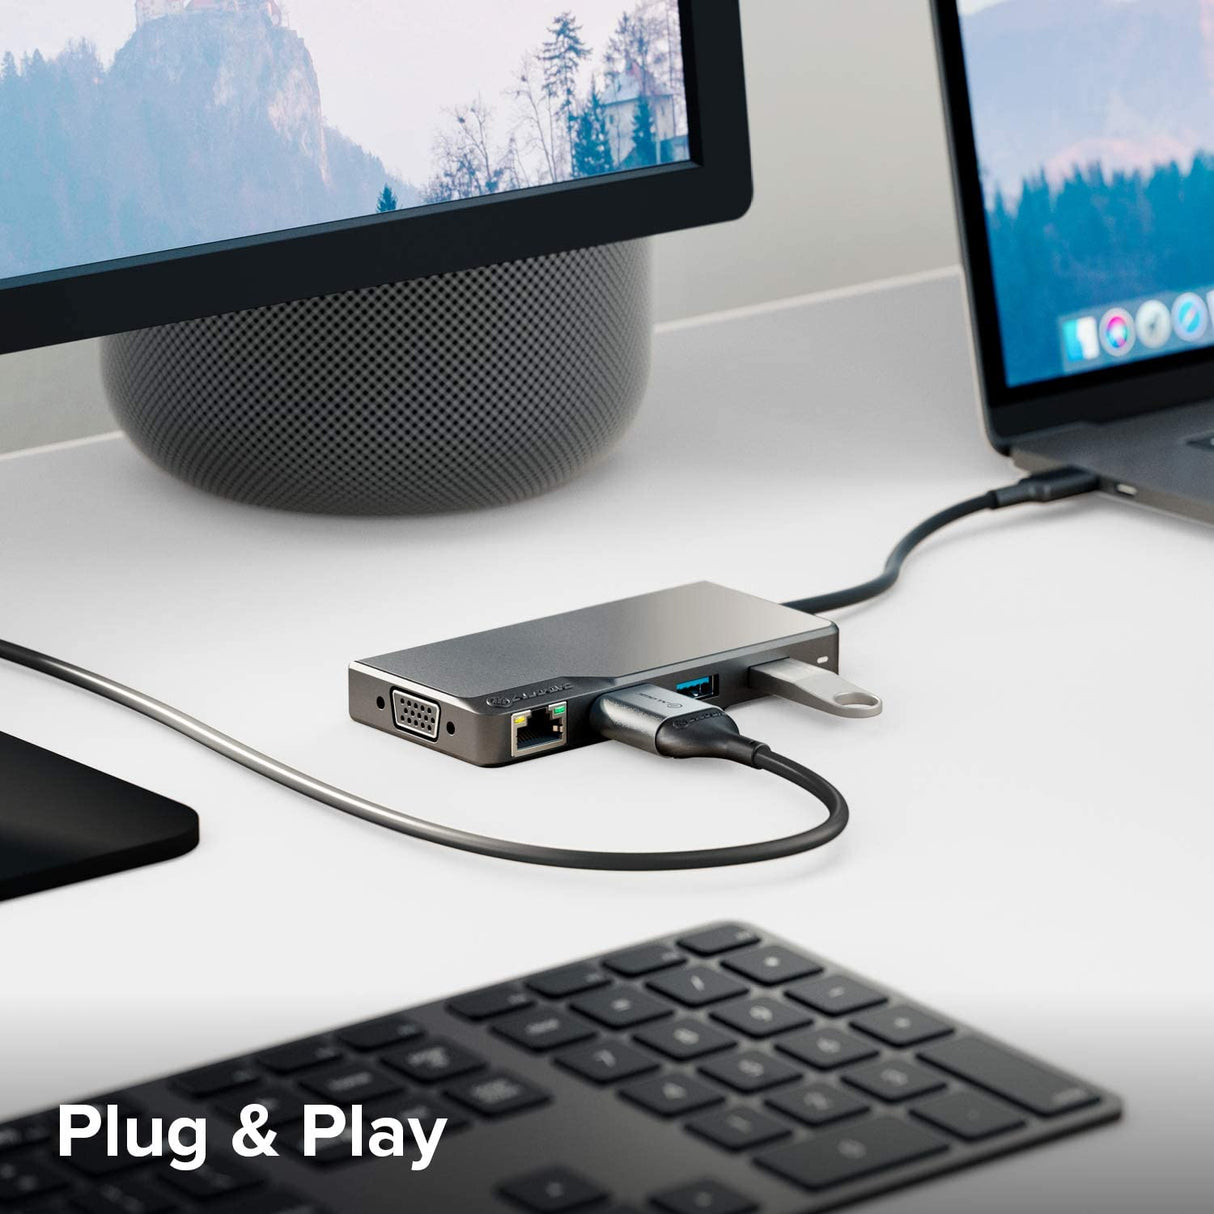 ALOGIC USB-C Fusion Max Hub, 6-in-1 Type C Adapter, 4K HDMI, VGA, USB A 3.1 with 100W Power Delivery, USB A 3.1, Gigabit Ethernet, Compatible with MacBook Pro/Air and iPad Pro/Air - Dealtargets.com